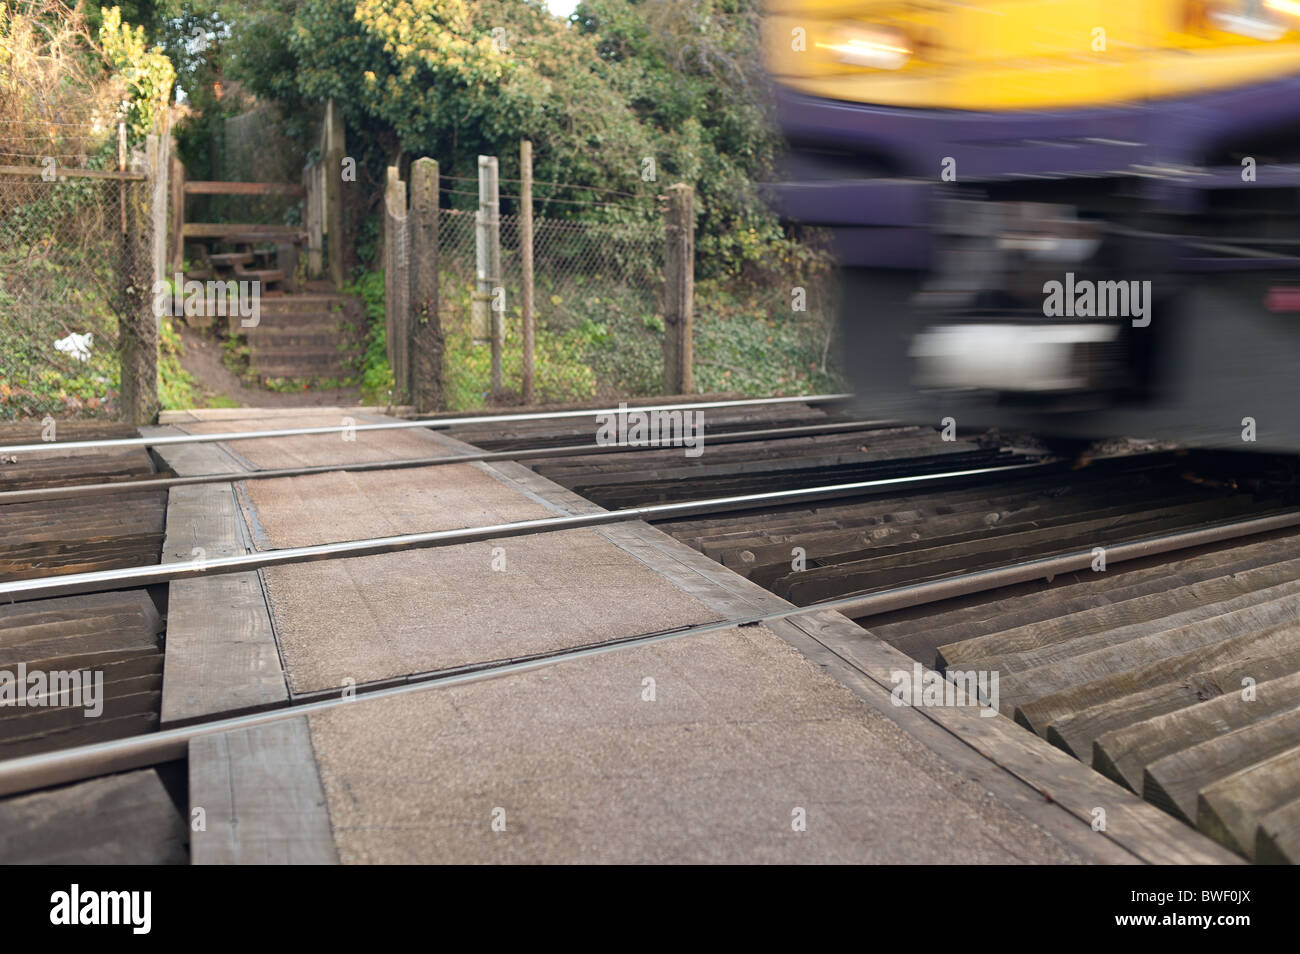 Unmanned pedestrian railway crossing footpath warning signs and passing train South eastern Trains Stock Photo